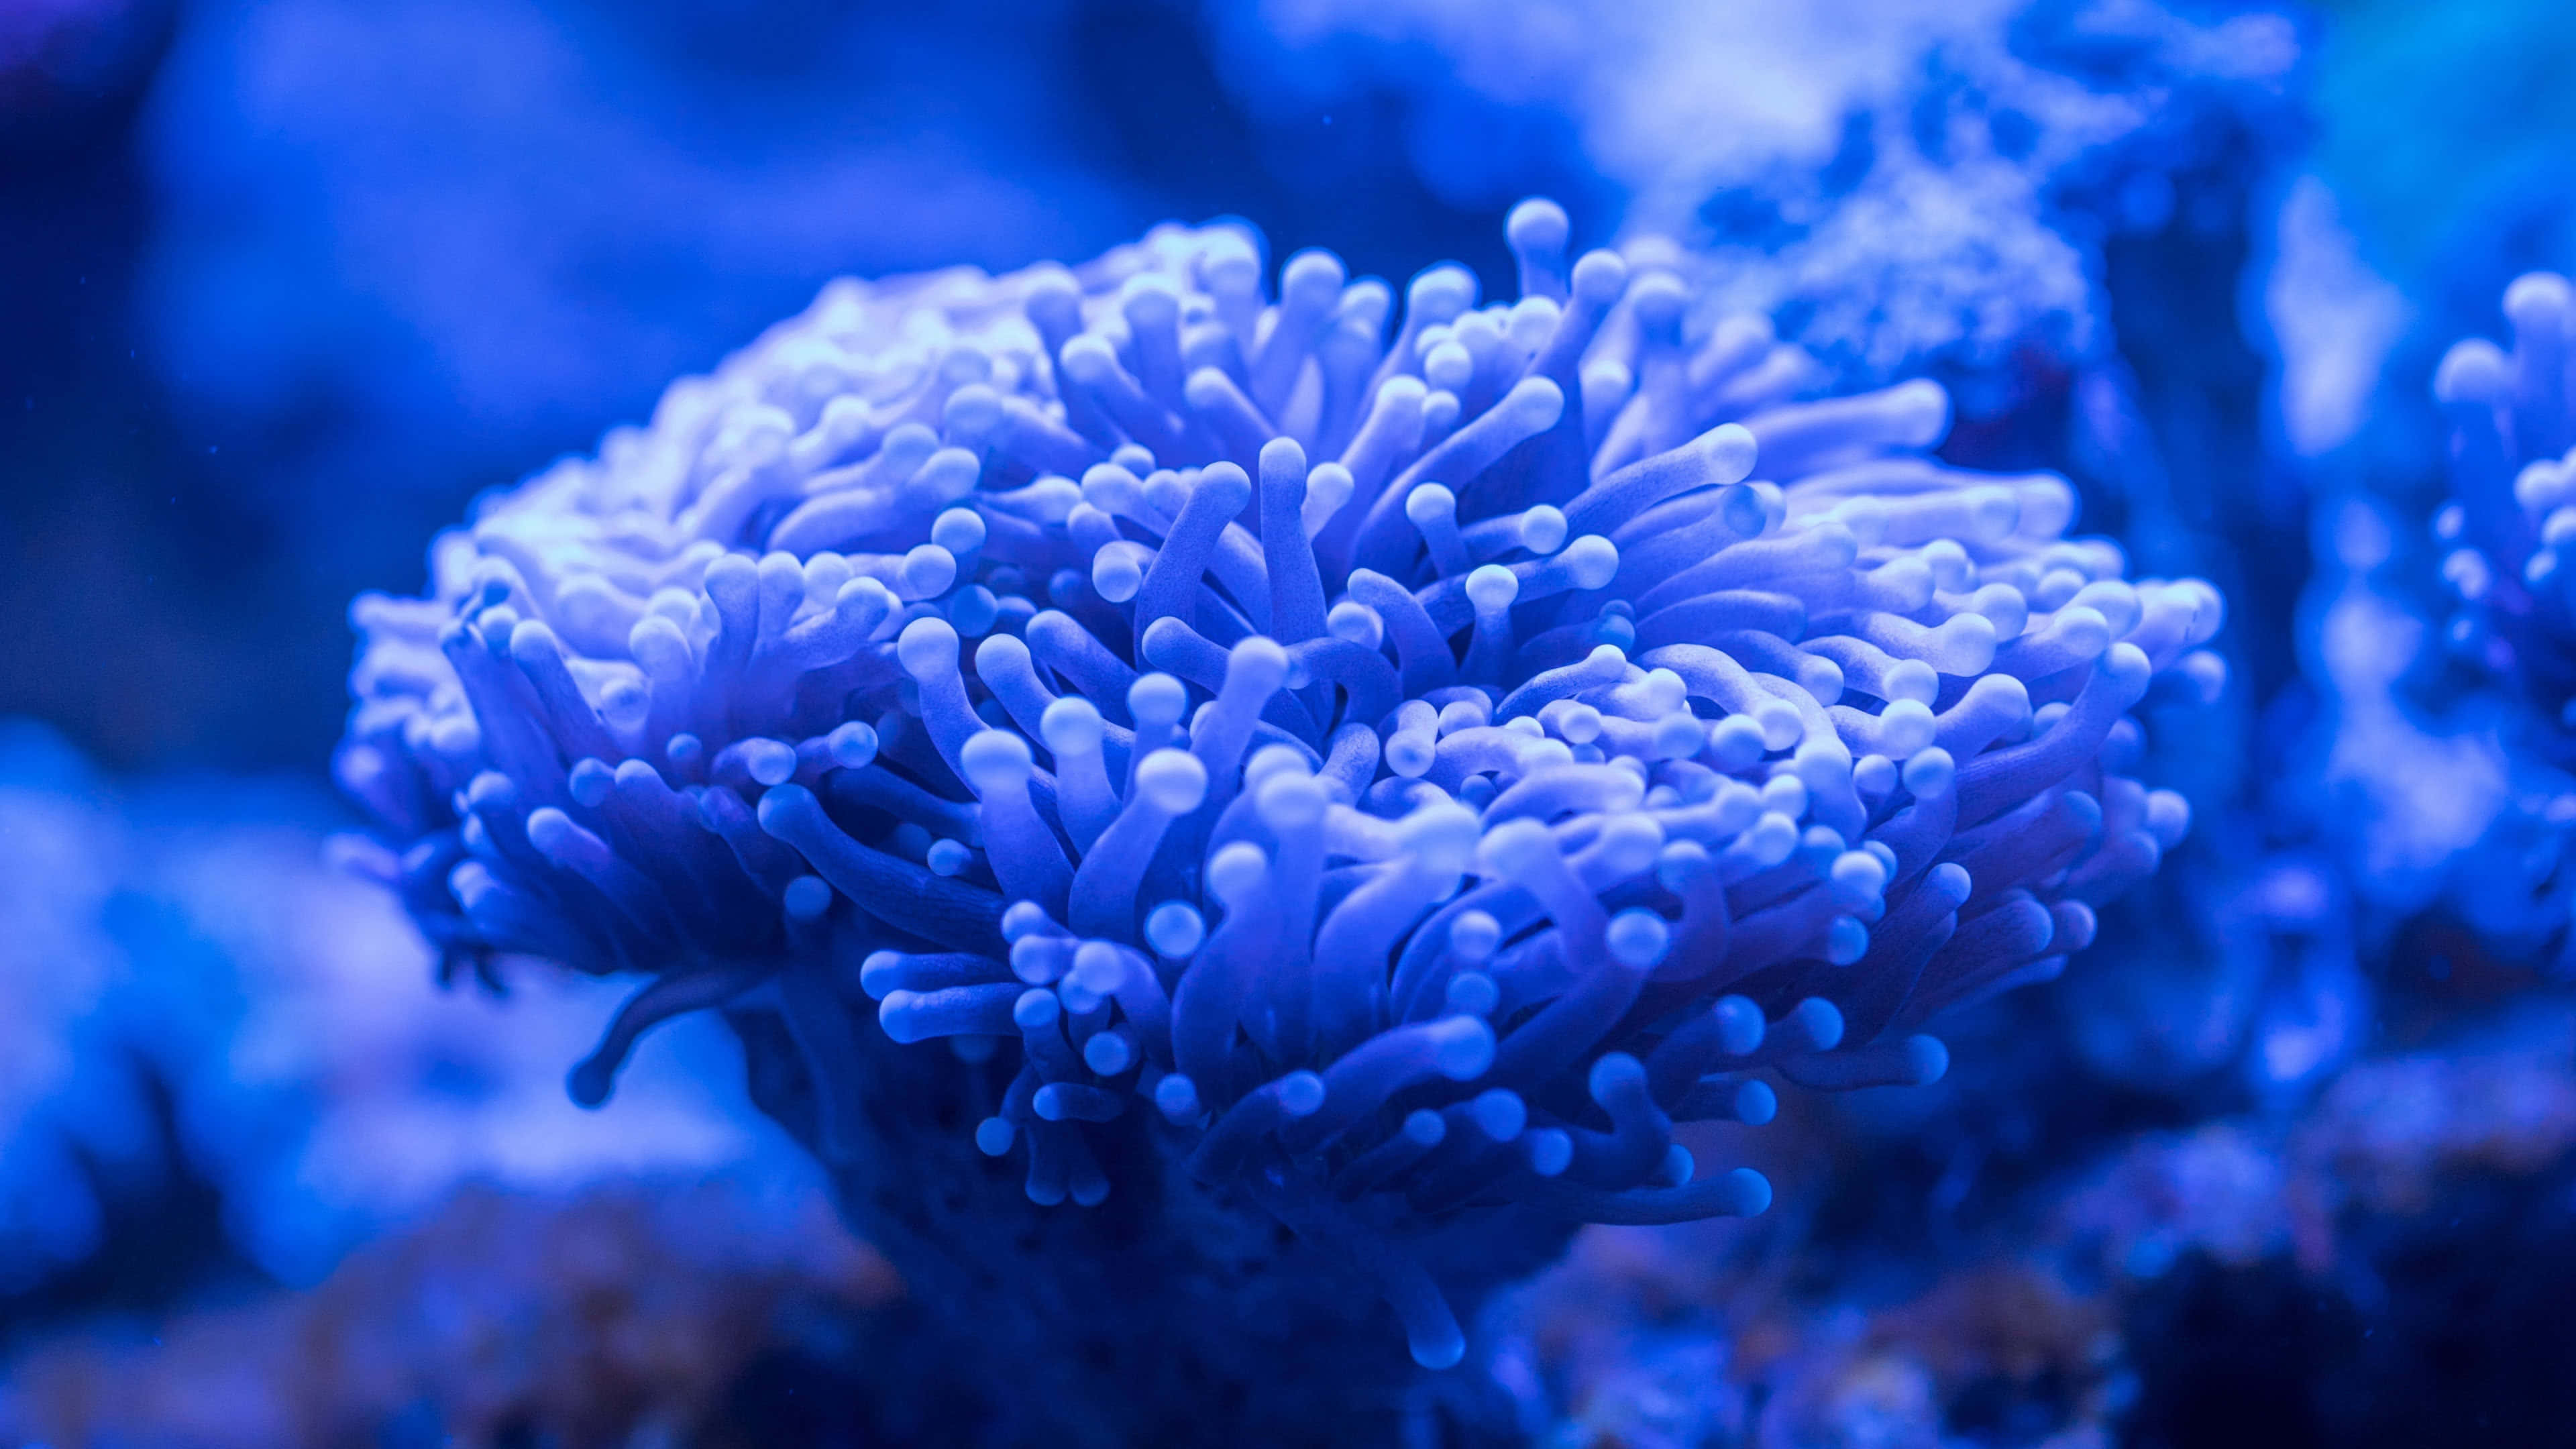 "an Up-close Encounter With Underwater Wonders: A Vibrant 4k View" Wallpaper